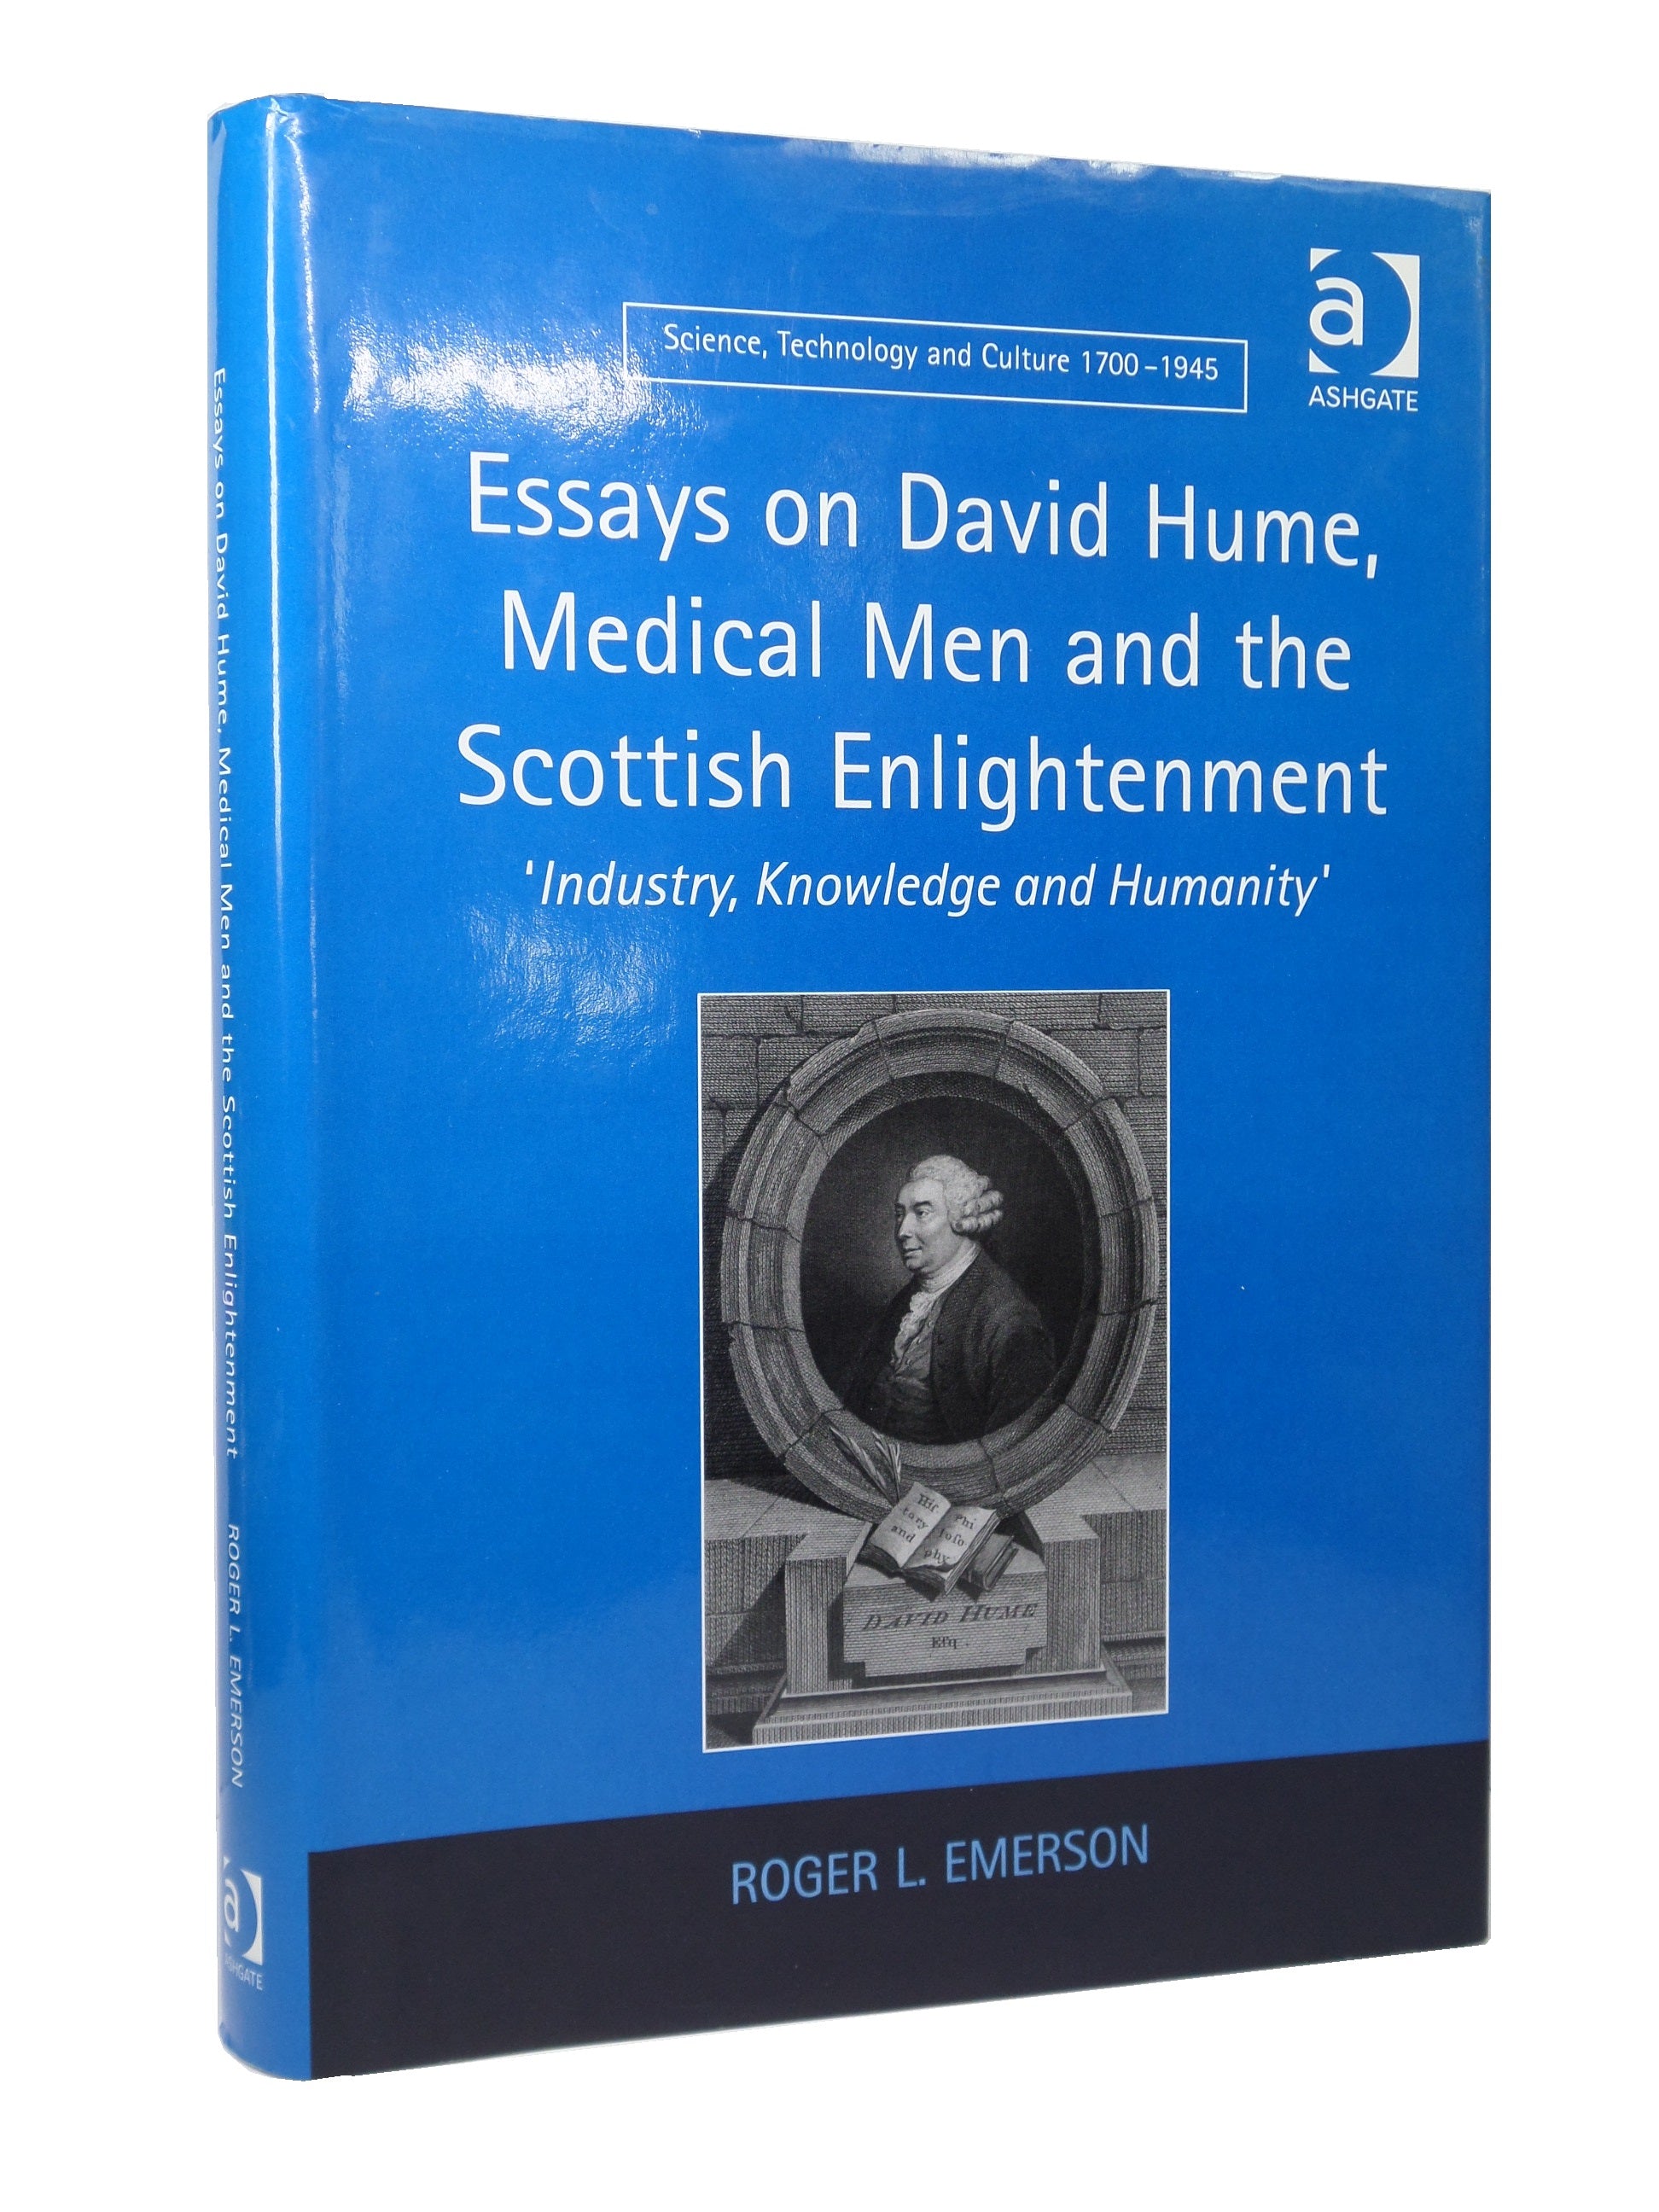 ESSAYS ON DAVID HUME, MEDICAL MEN & THE SCOTTISH ENLIGHTENMENT BY ROGER EMERSON